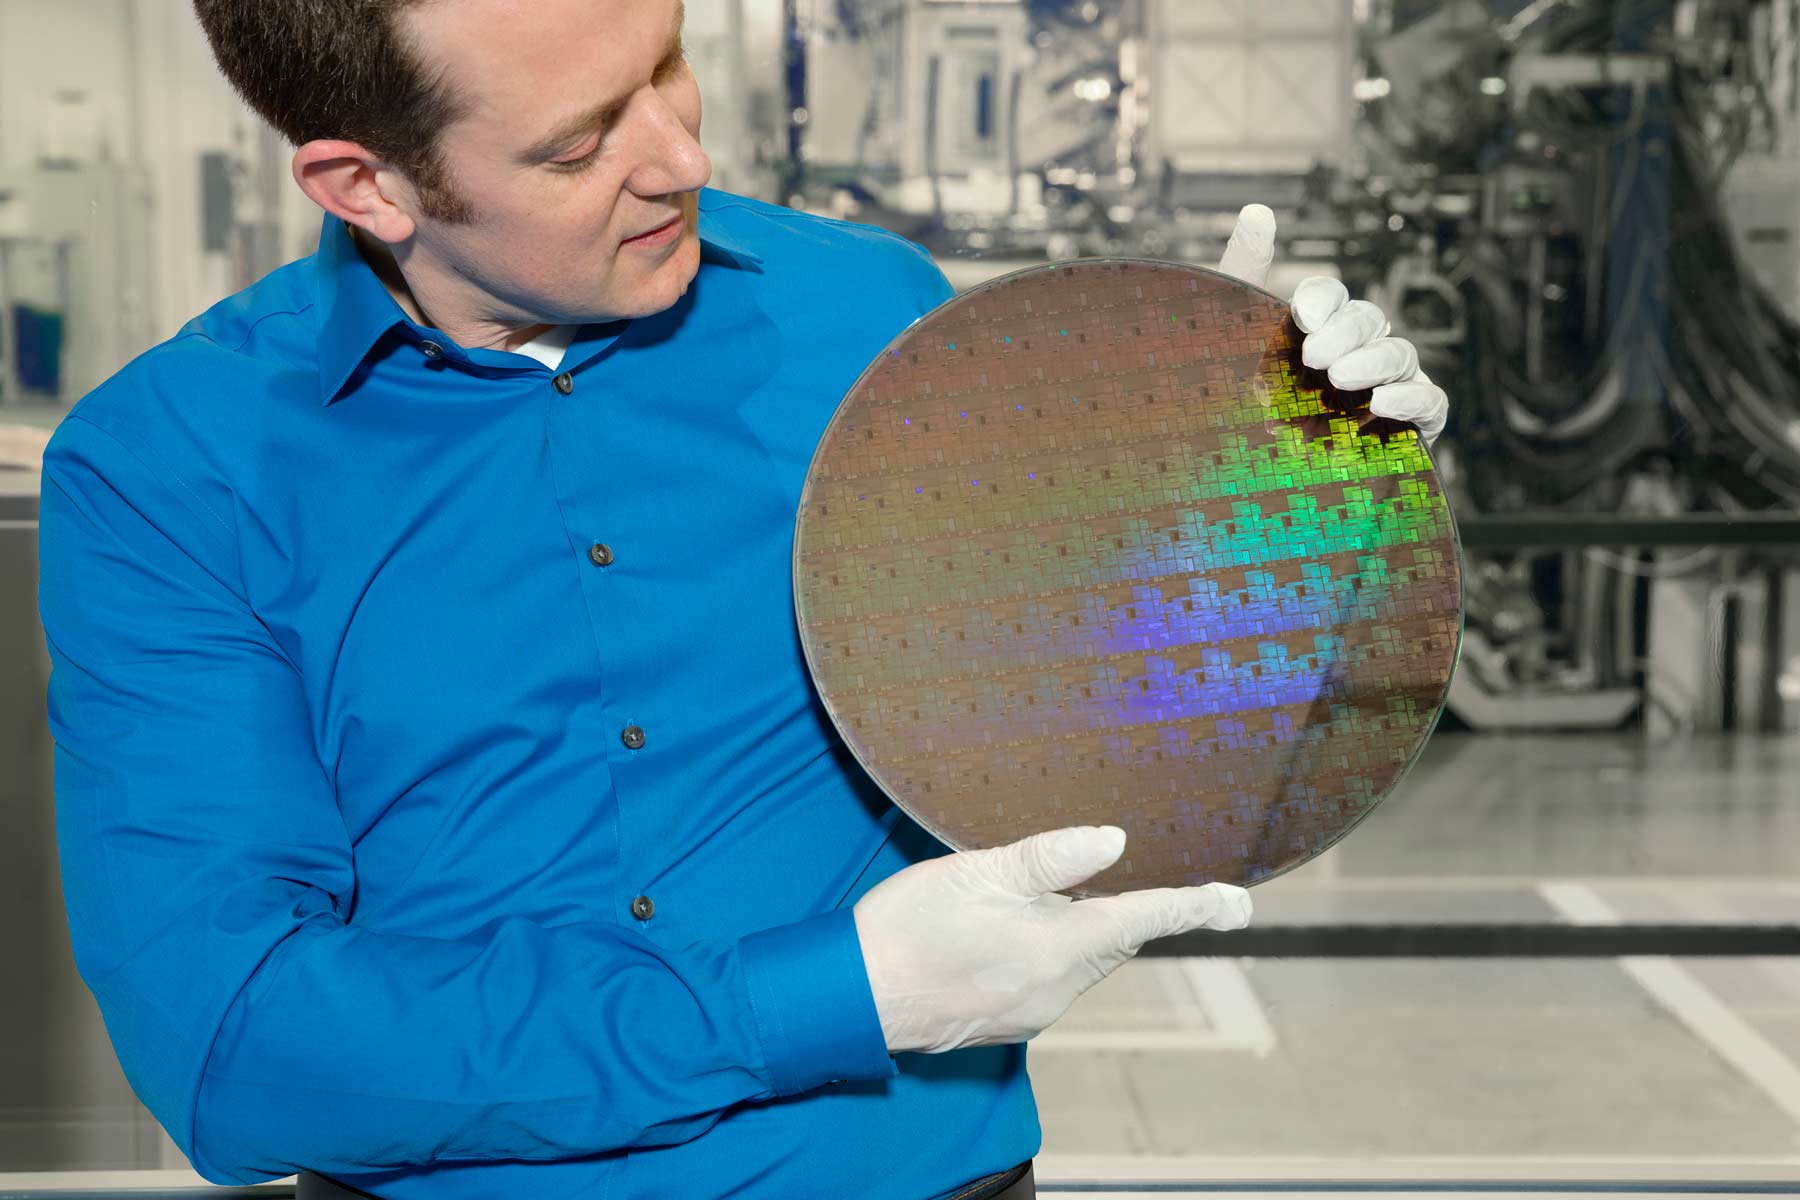 IBM Research scientist Nicolas Loubet holds a wafer of chips with 5nm silicon nanosheet transistors manufactured using an industry-first process that can deliver 40 percent performance enhancement at fixed power, or 75 percent power savings at matched performance. (IBM/Connie Zhou)